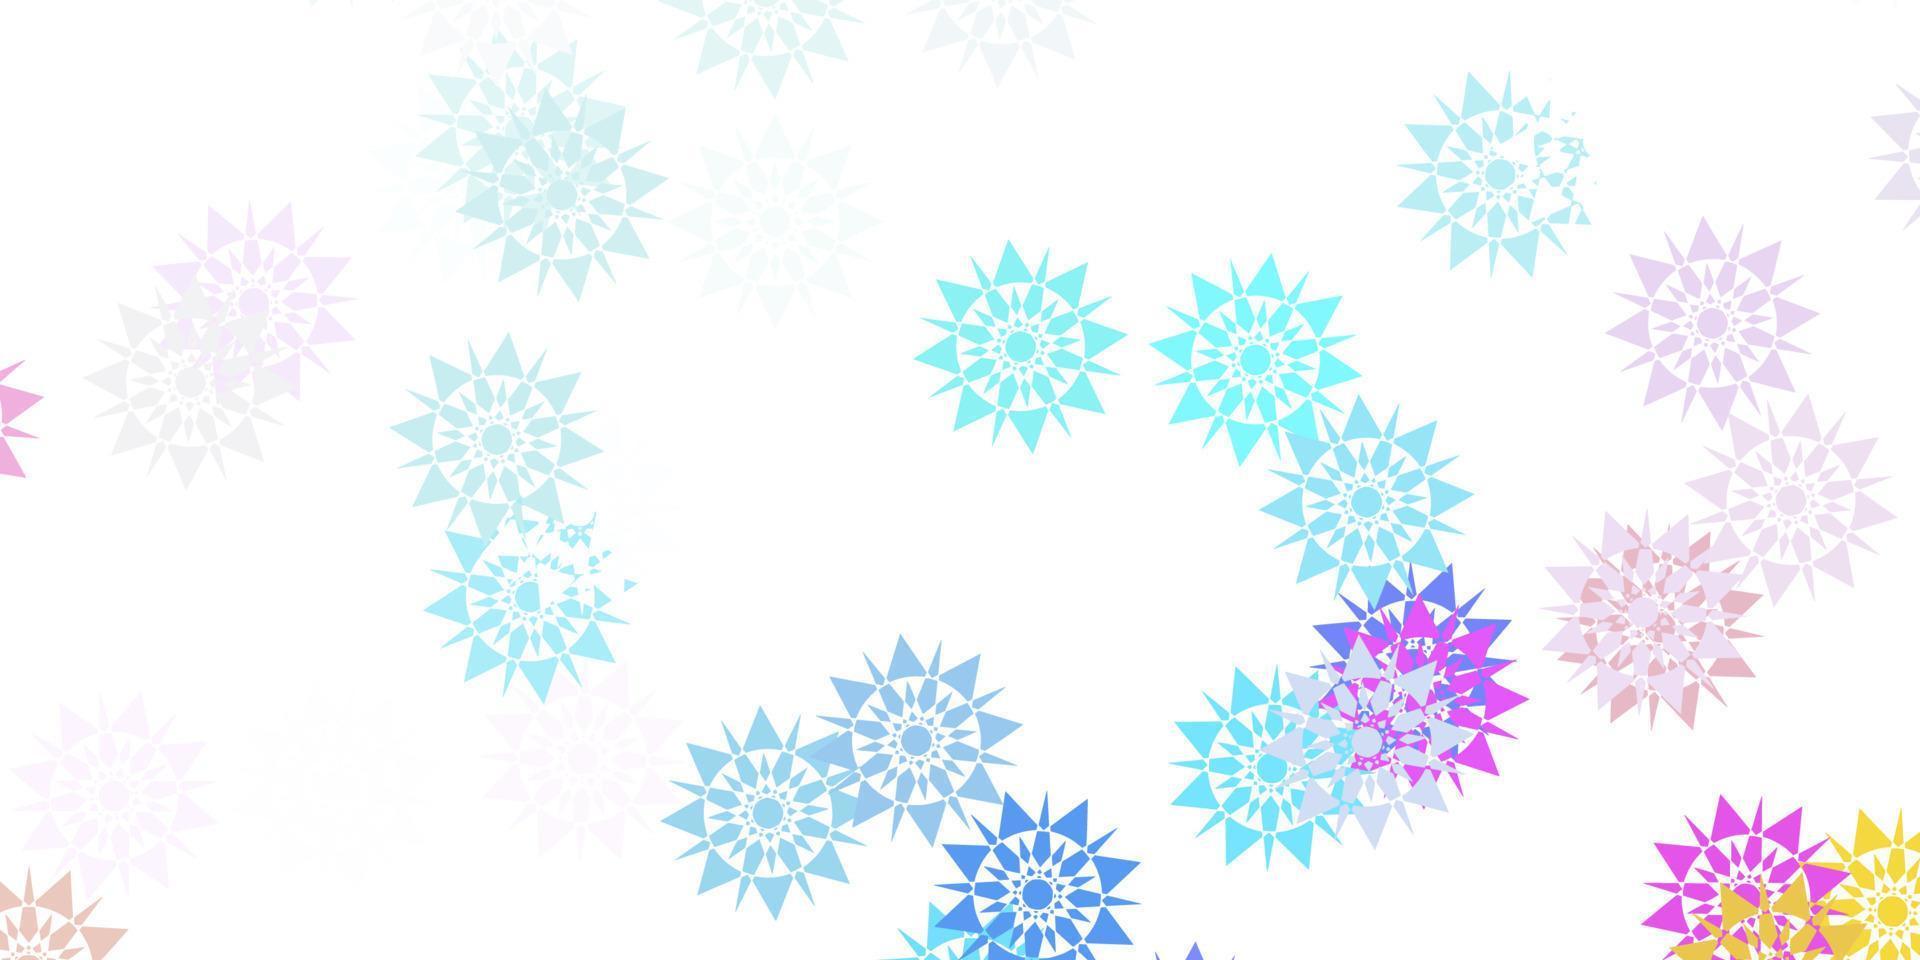 Light multicolor vector background with christmas snowflakes.